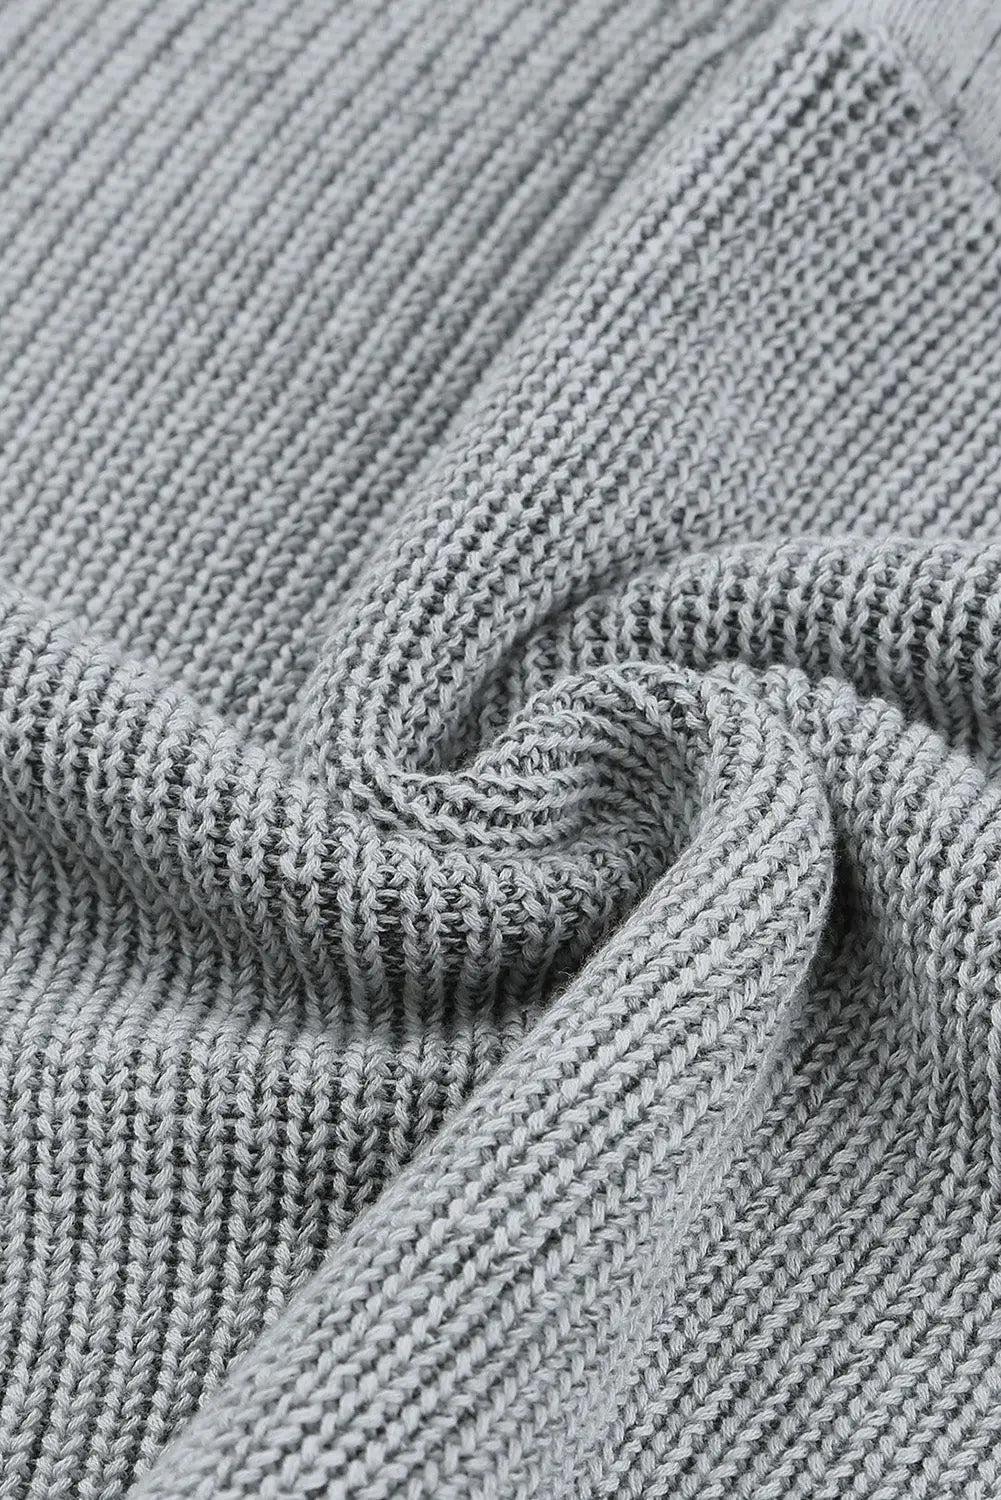 Gray henley v neck hooded sweater - sweaters & cardigans